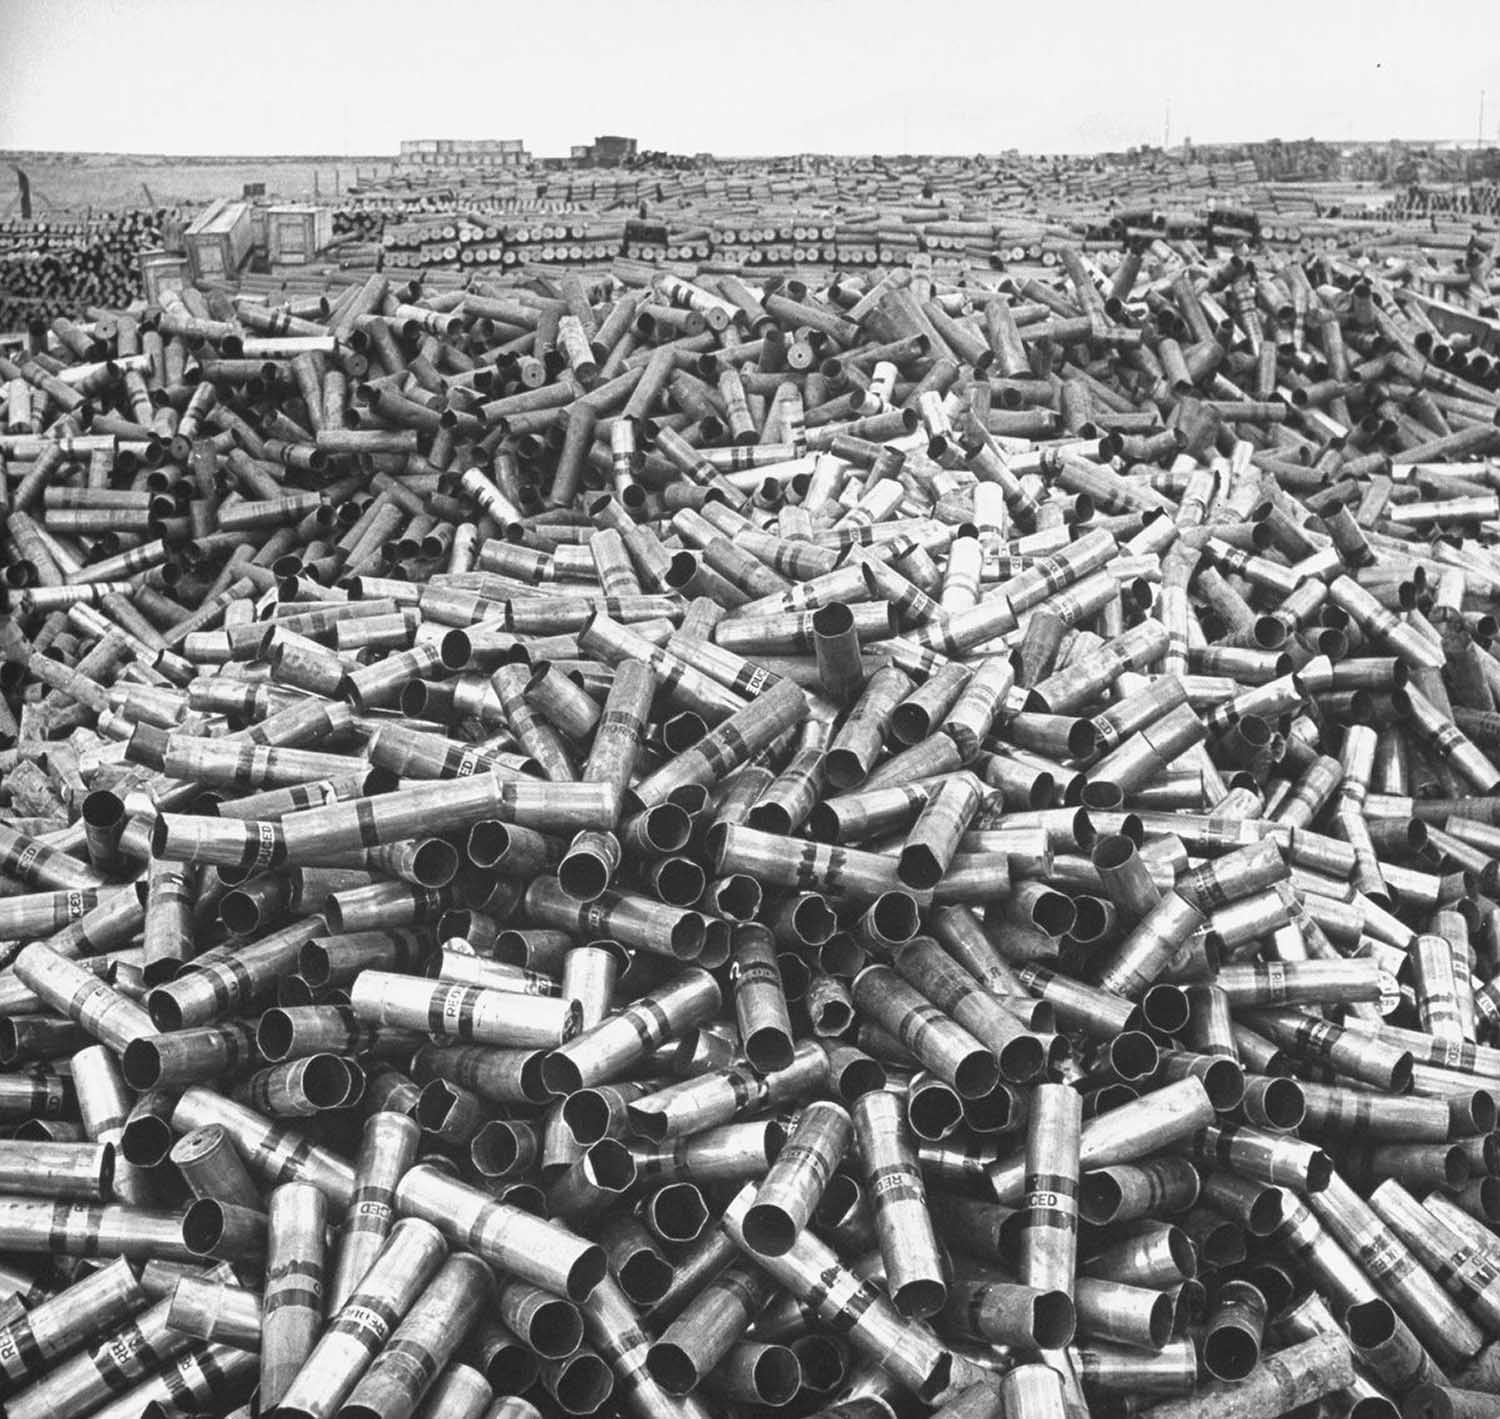 18 million pounds of scrap brass is piled up at a U.S. Army depot storing unused equipment, 1946.